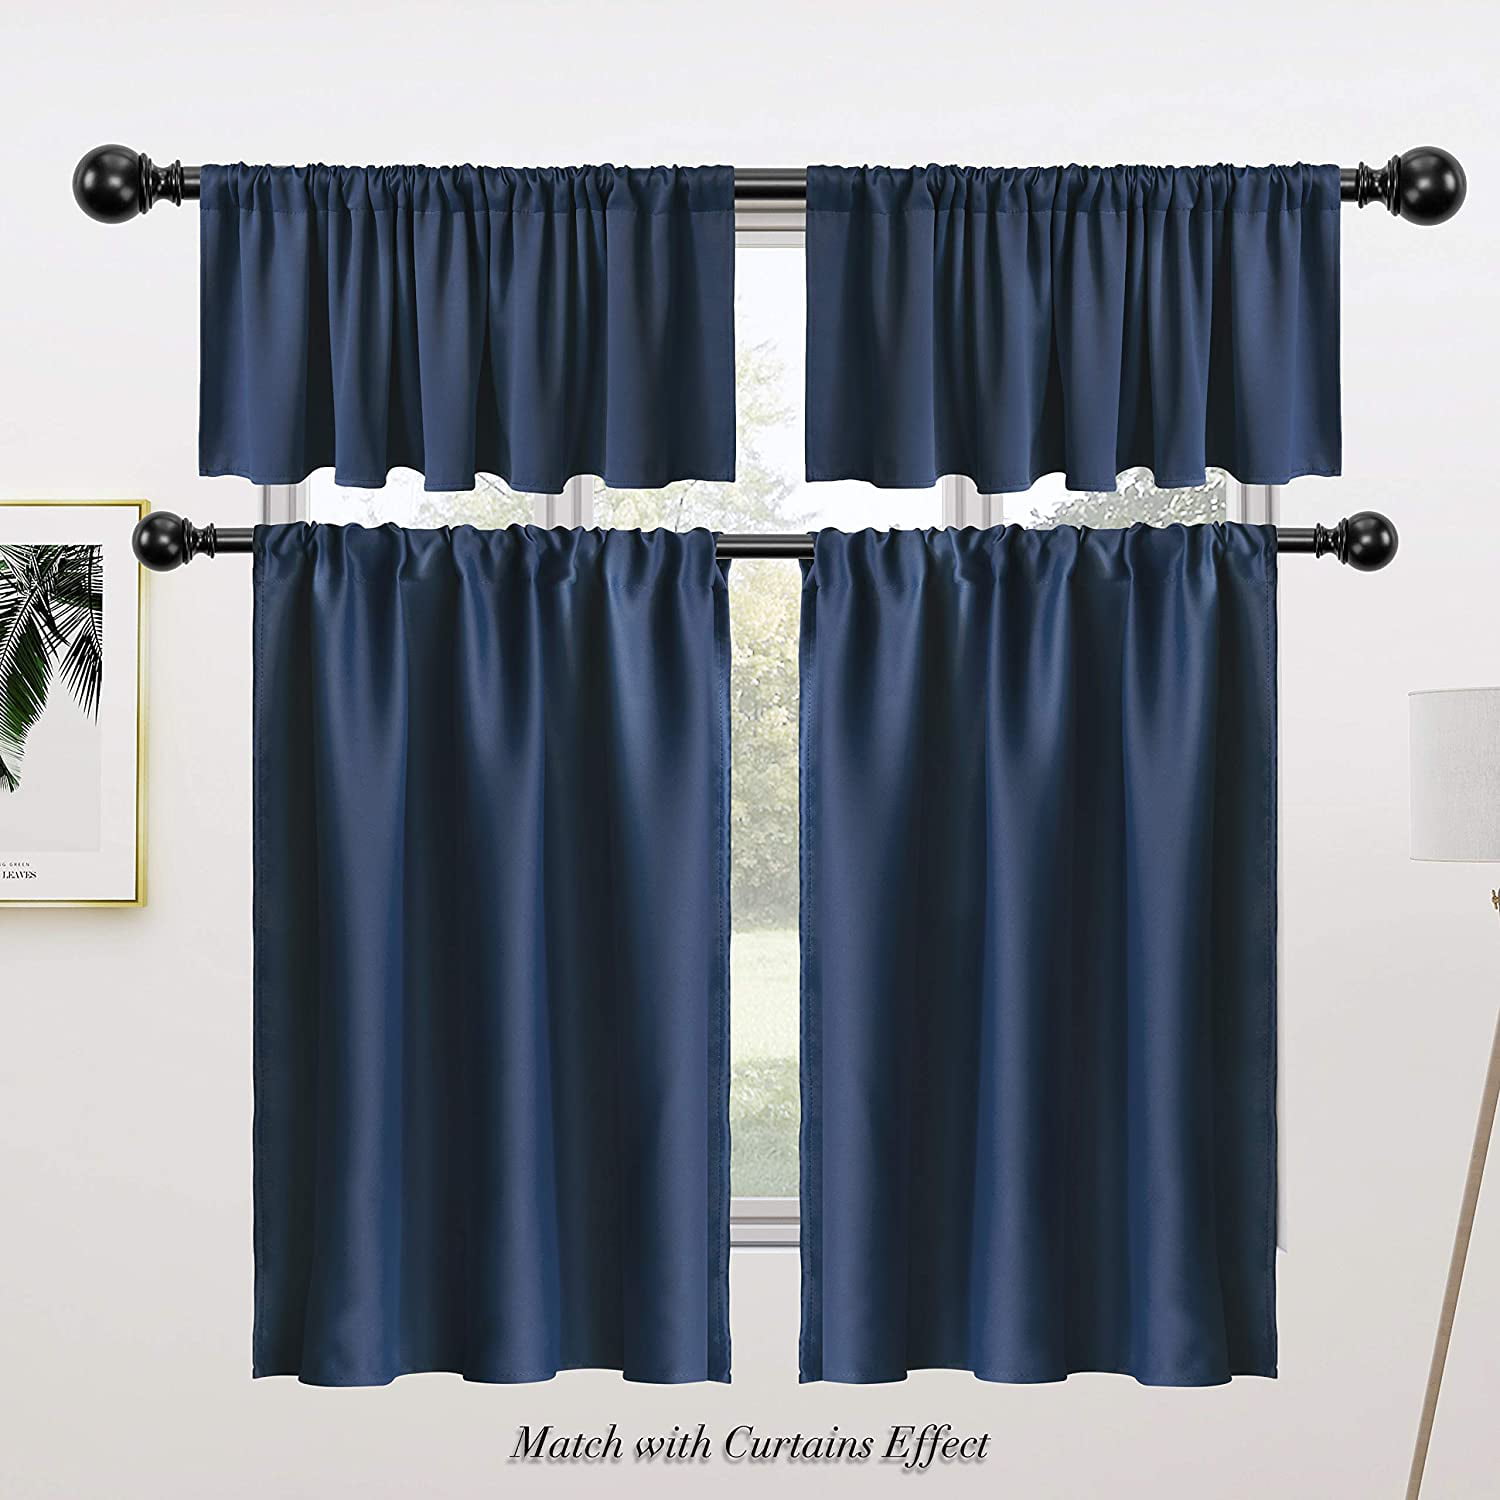 Red WONTEX Kitchen Curtains Tiers Set of 2 Room Darkening Rod Pocket Cafe Curtain Panels Short Thermal Blackout Curtains for Small Window 30 x 24 inch Long